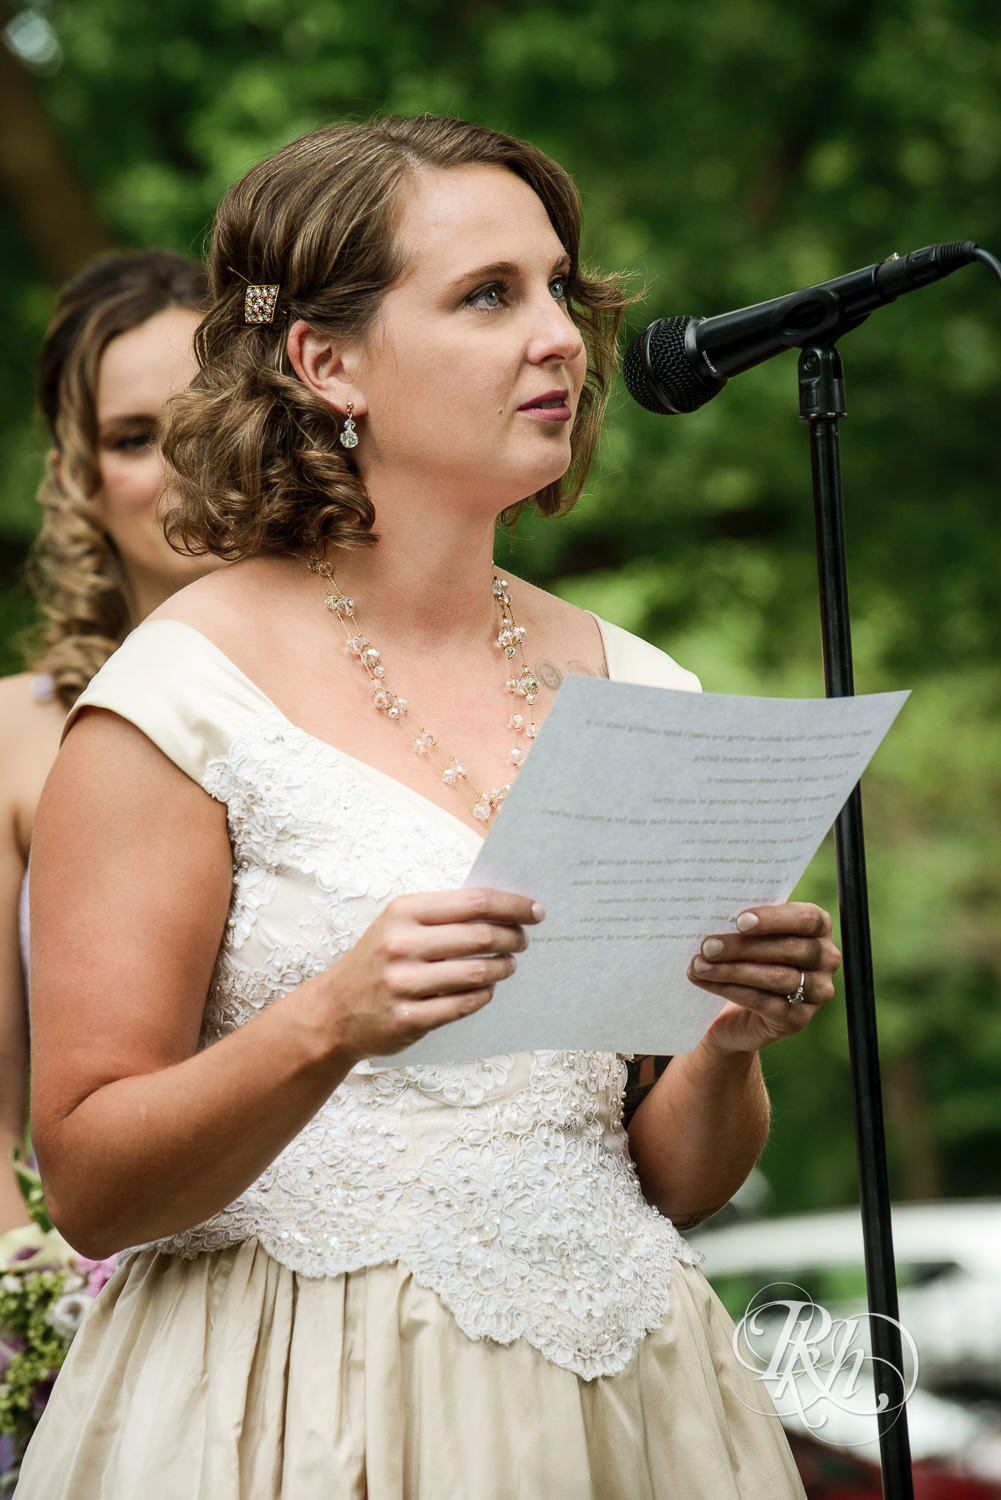 Bride and groom read vows during wedding ceremony at Summit Manor Reception House in Saint Paul, Minnesota.